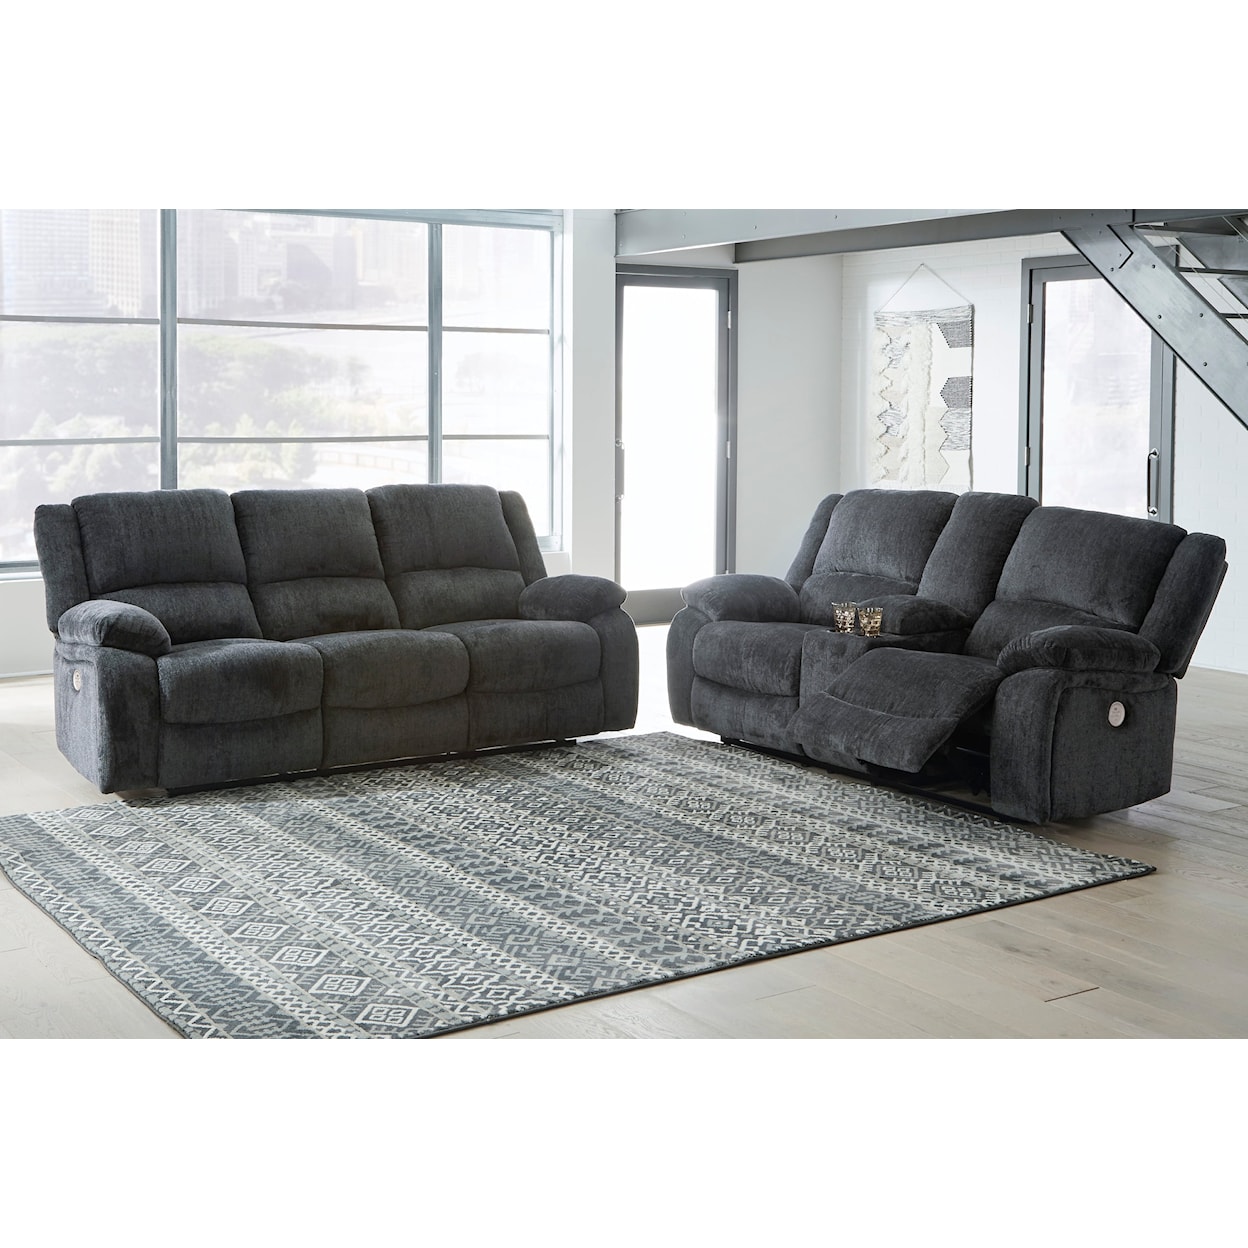 Benchcraft Draycoll Power Reclining Living Room Group